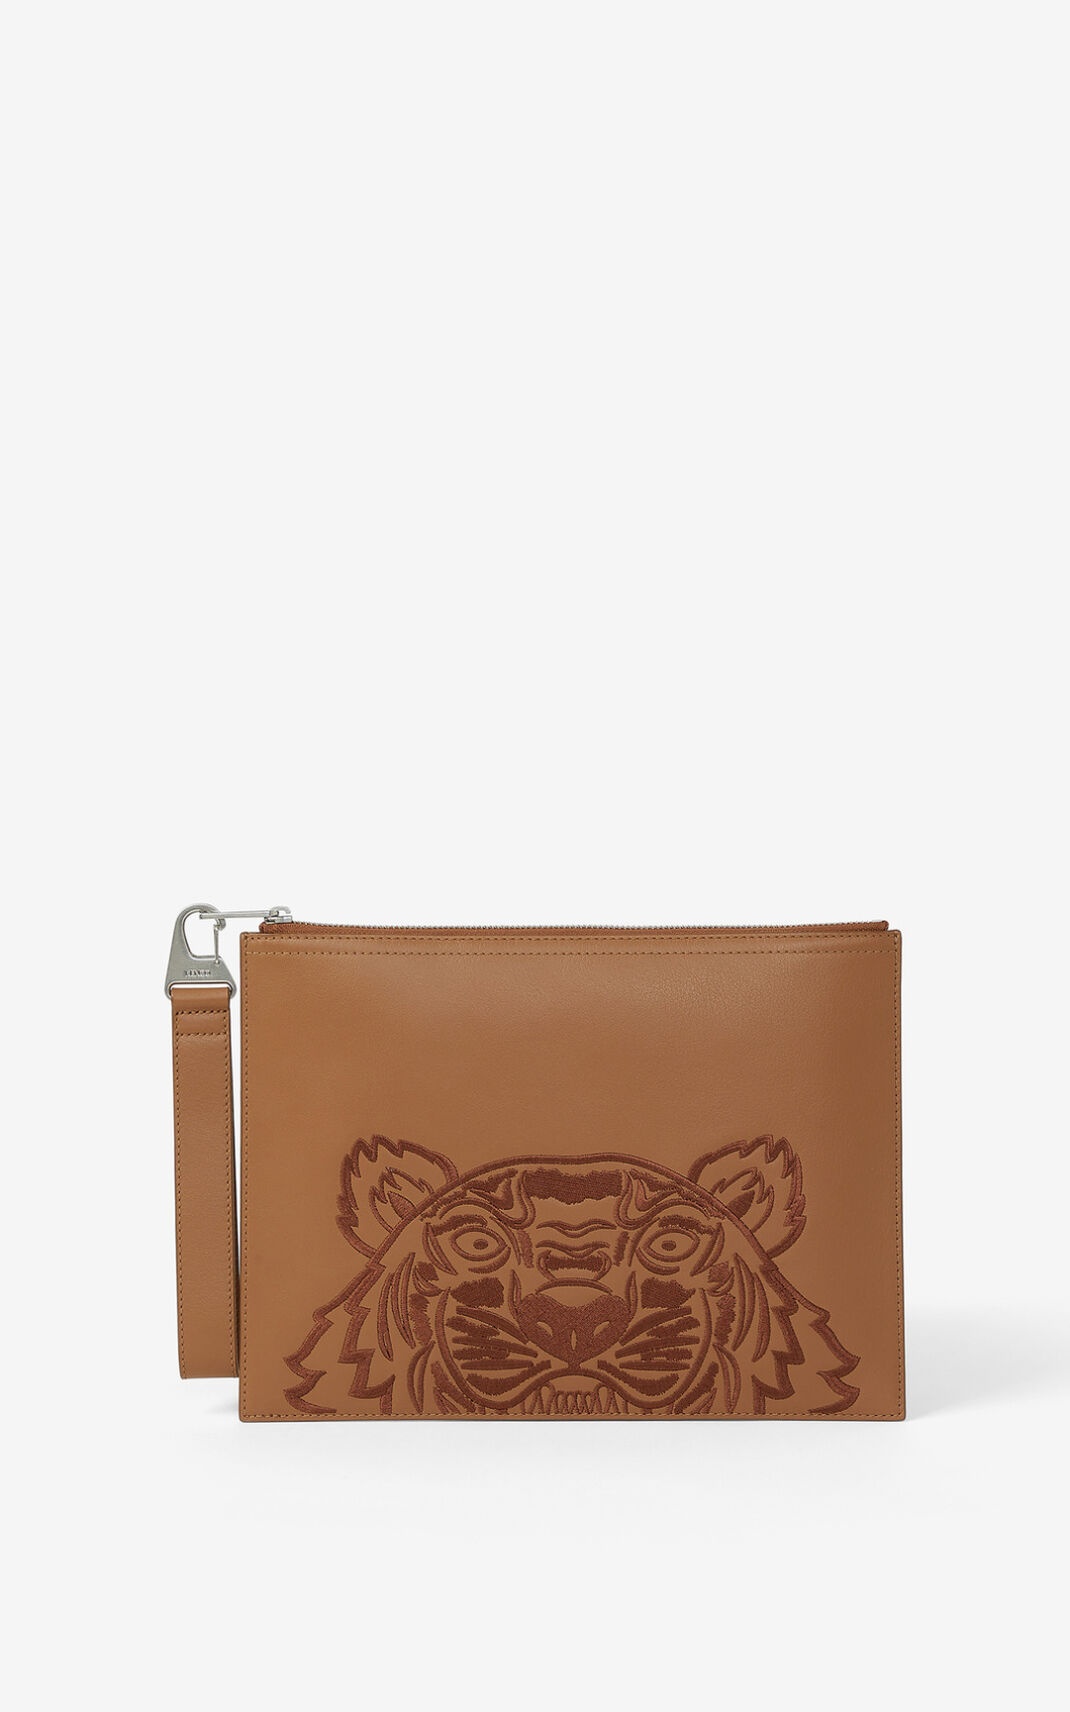 Kampus Tiger large grained leather clutch - 1